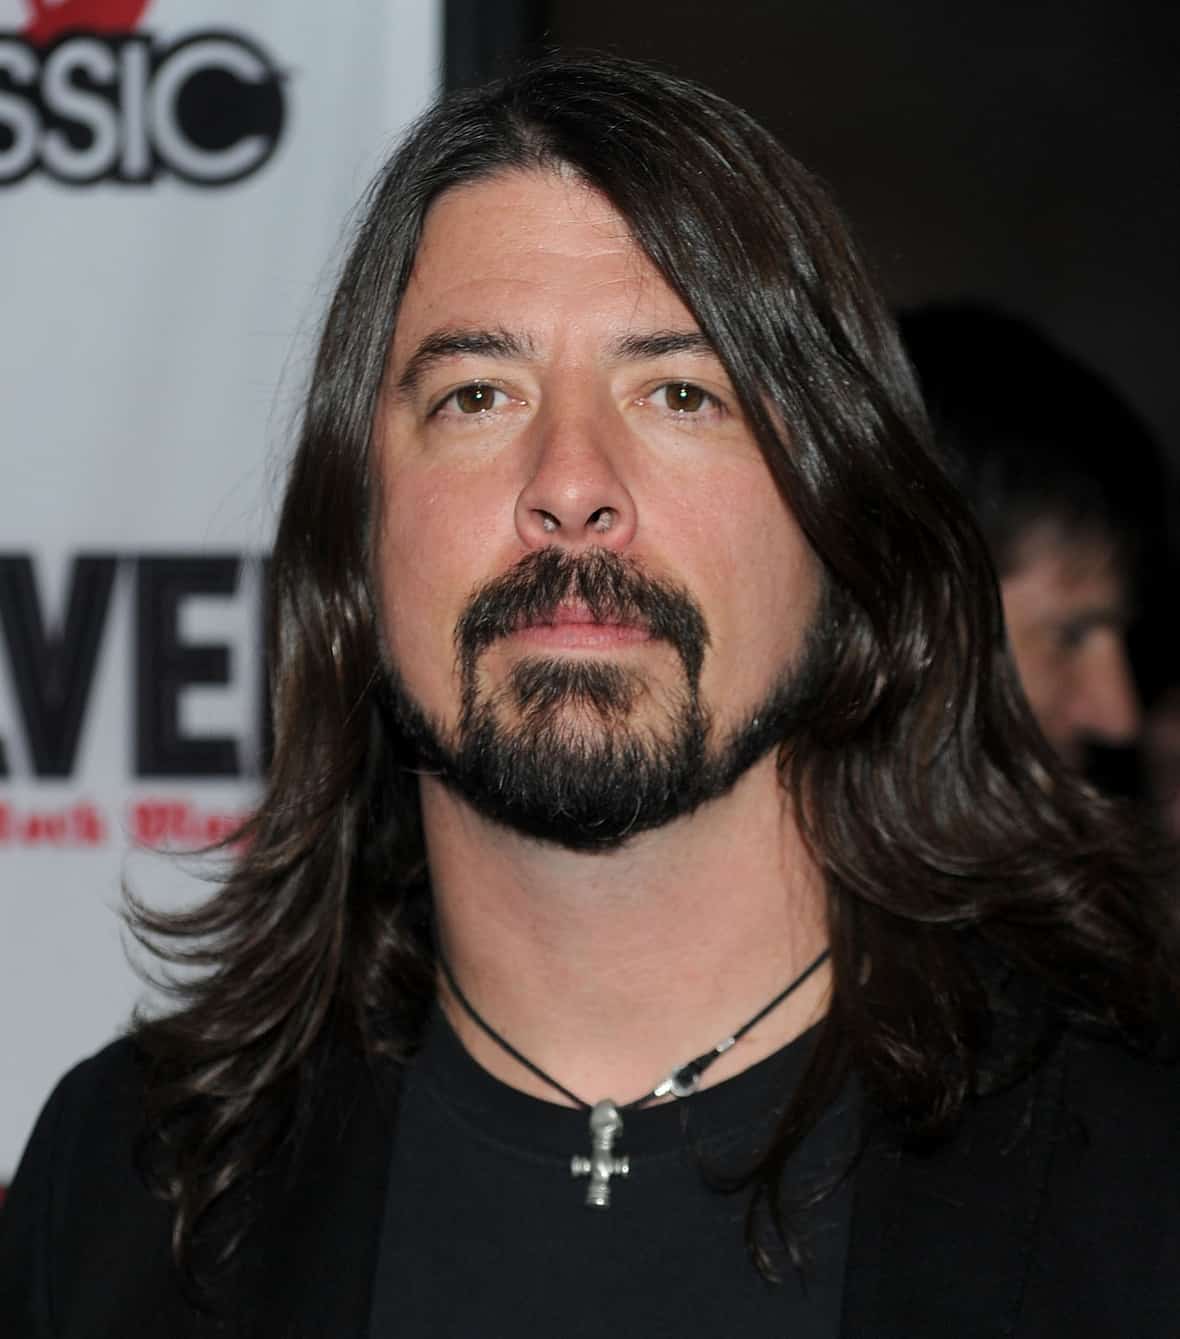 dave grohl | Dave grohl, Cross necklace, Necklace